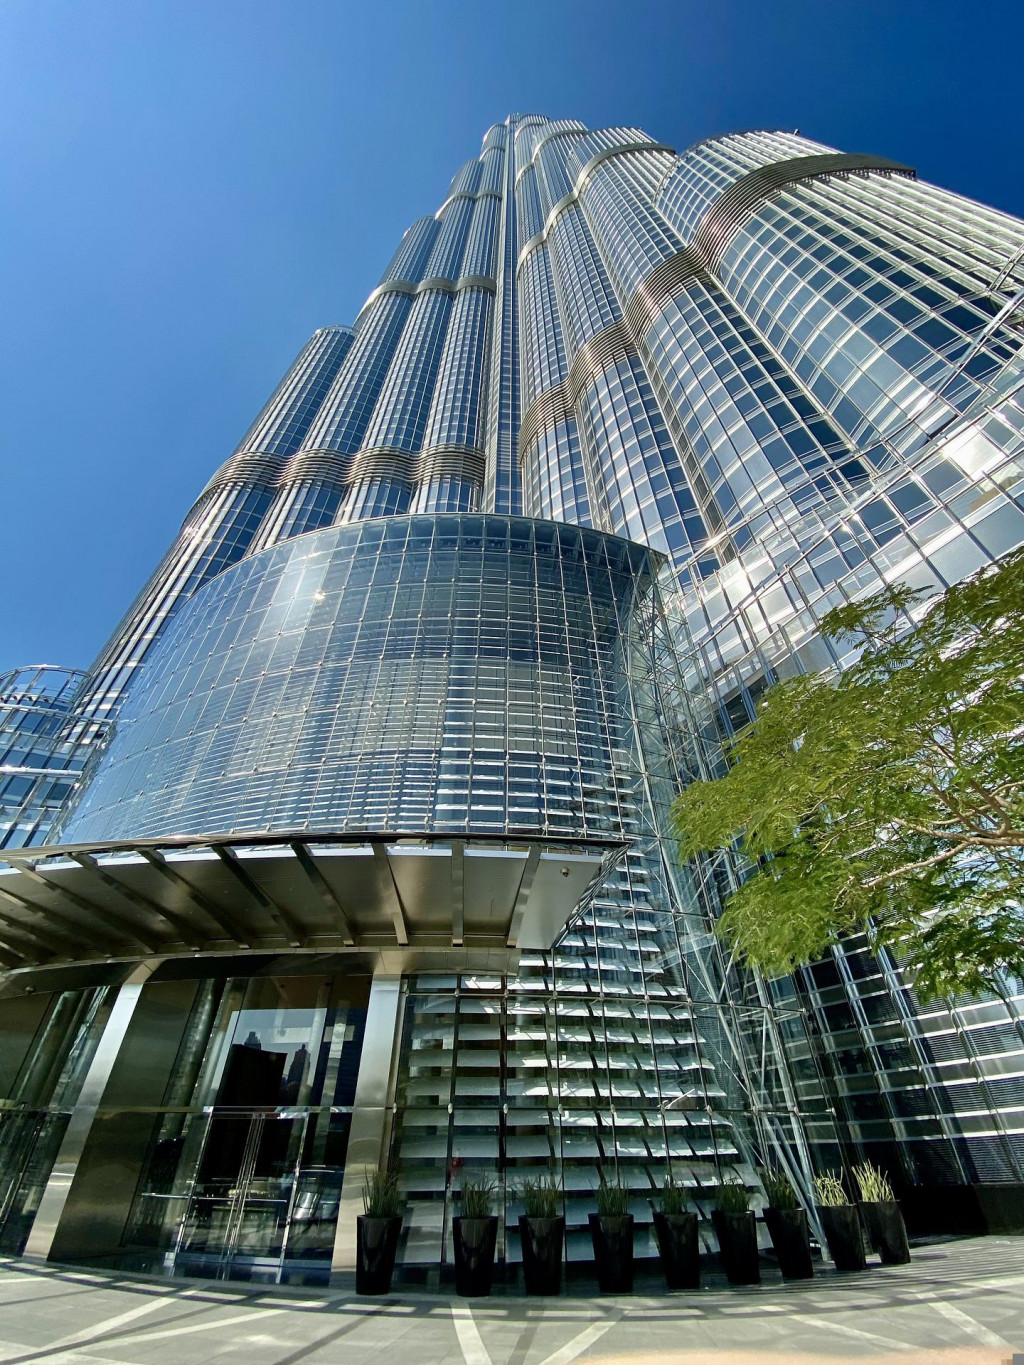 What to Visit During Your Stay in Dubai - Burj Khalifa